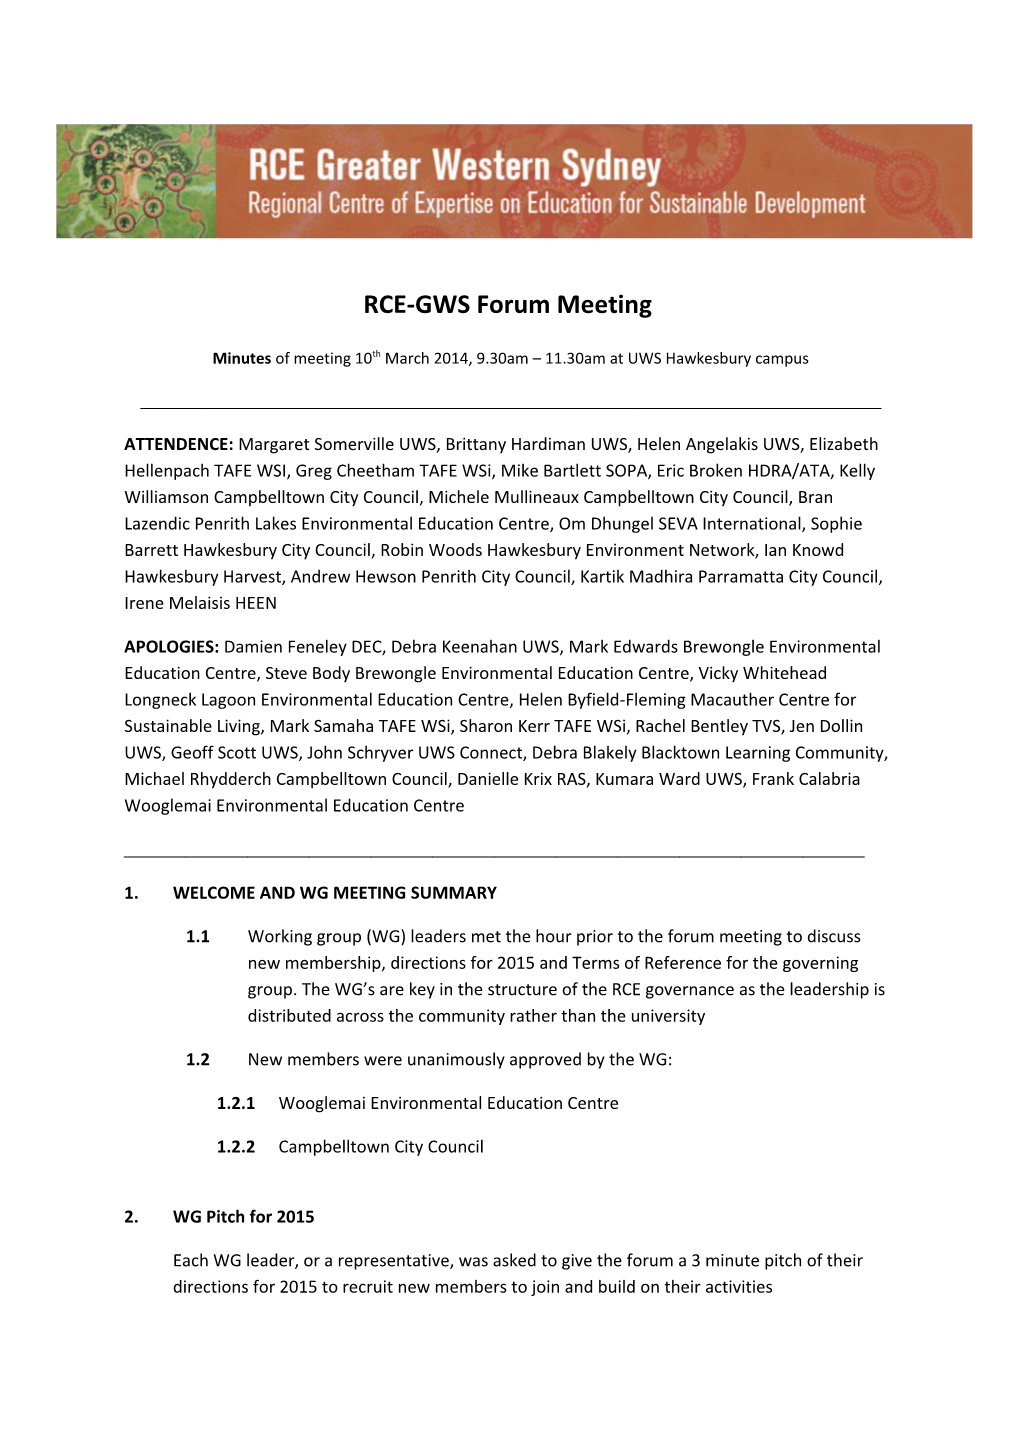 RCE-GWS Forum Meeting Minutes of Meeting 10Th March 2014, 9.30Am 11.30Am at UWS Hawkesbury